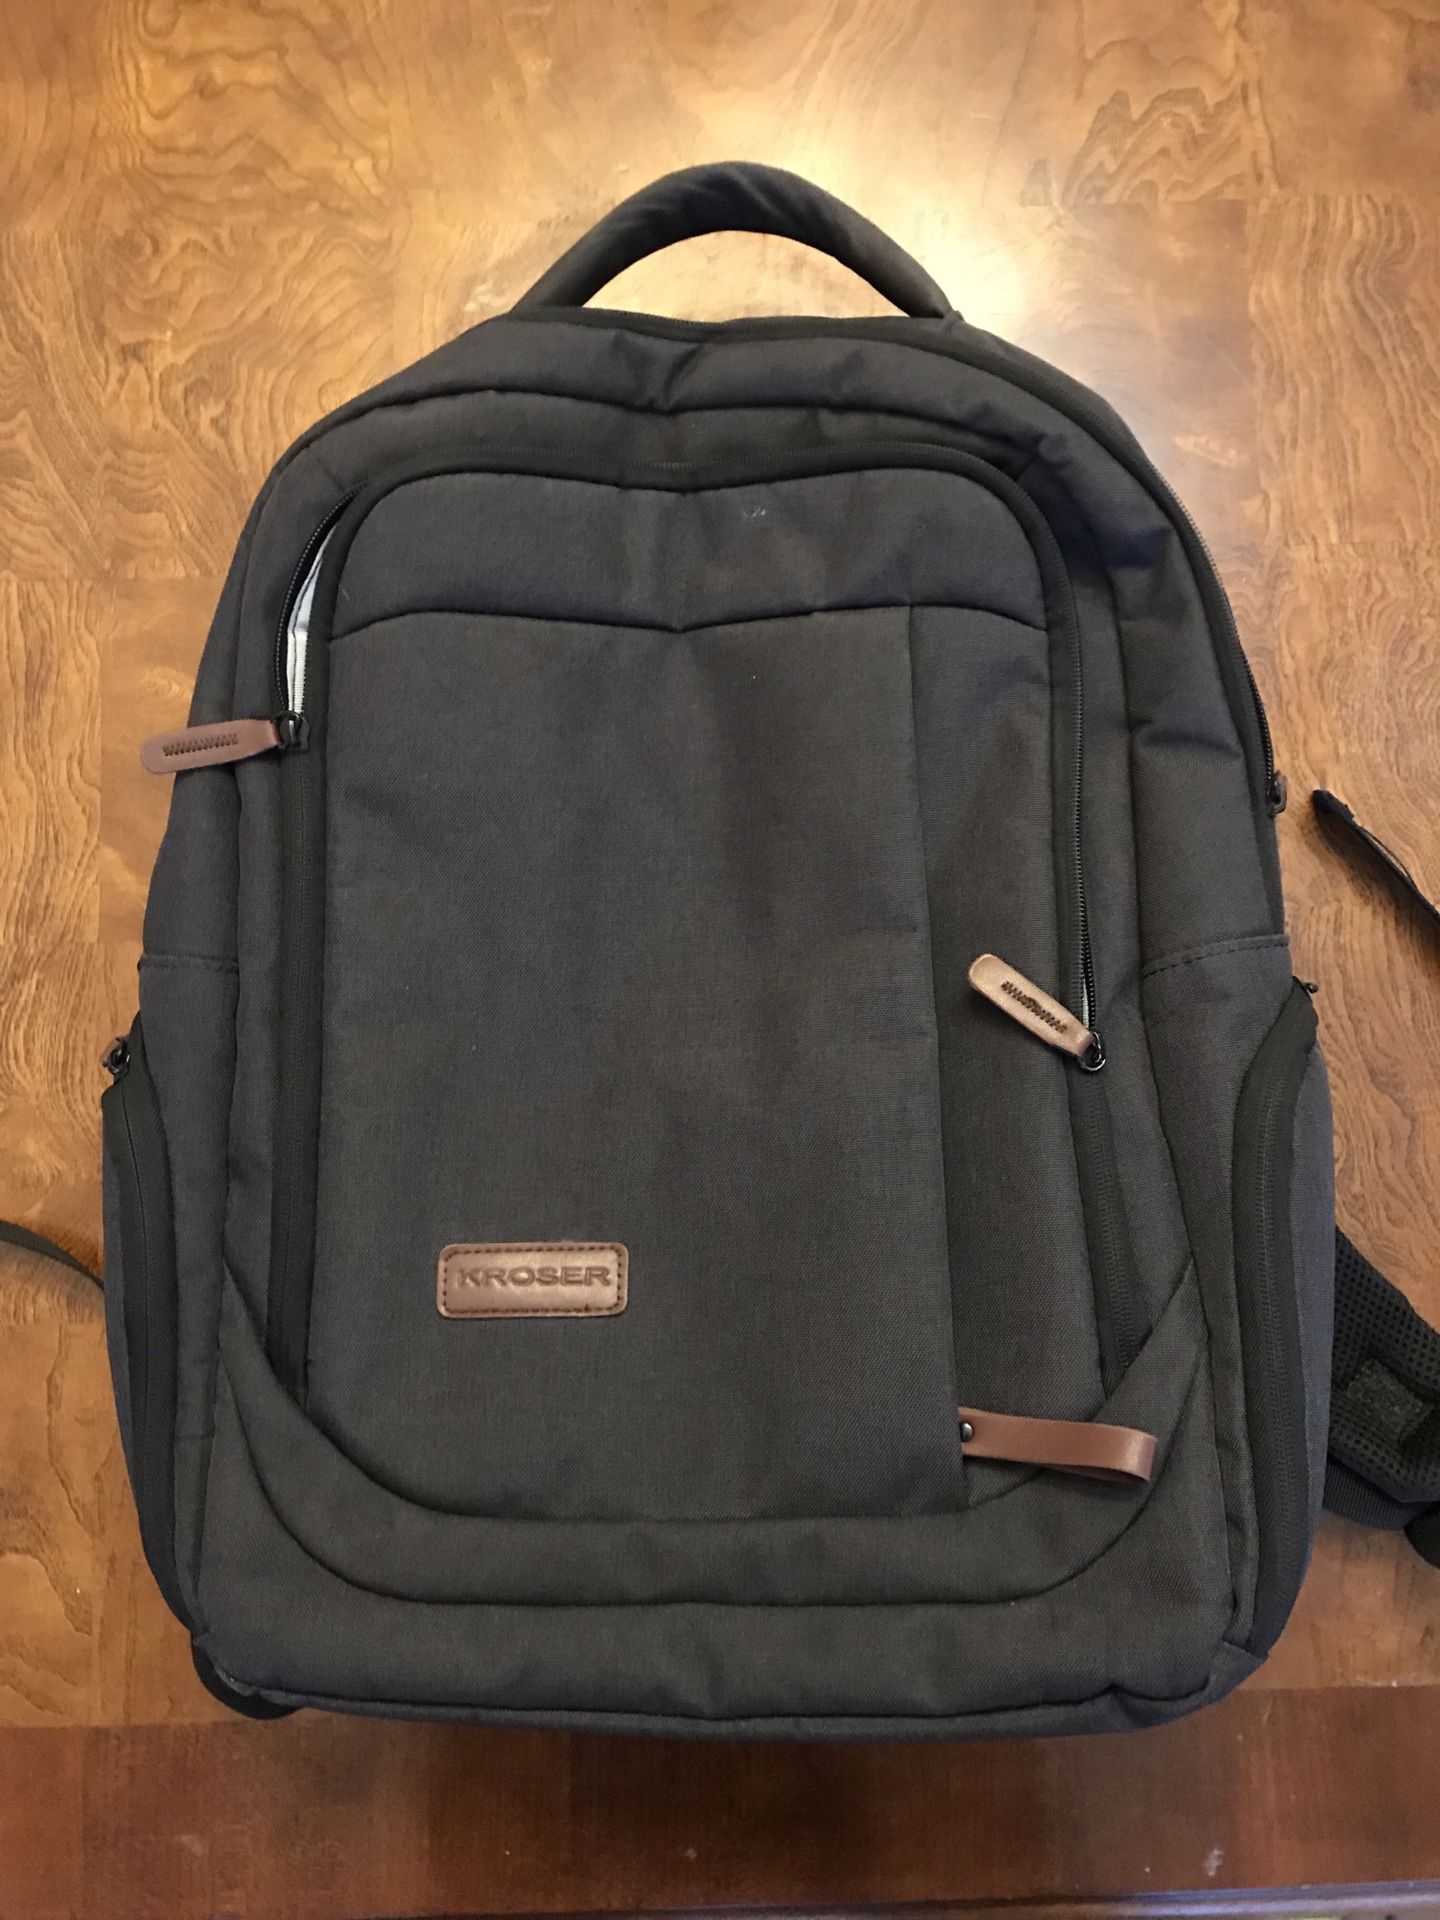 Tech Back Back Used Great Condition work laptop charging backpack